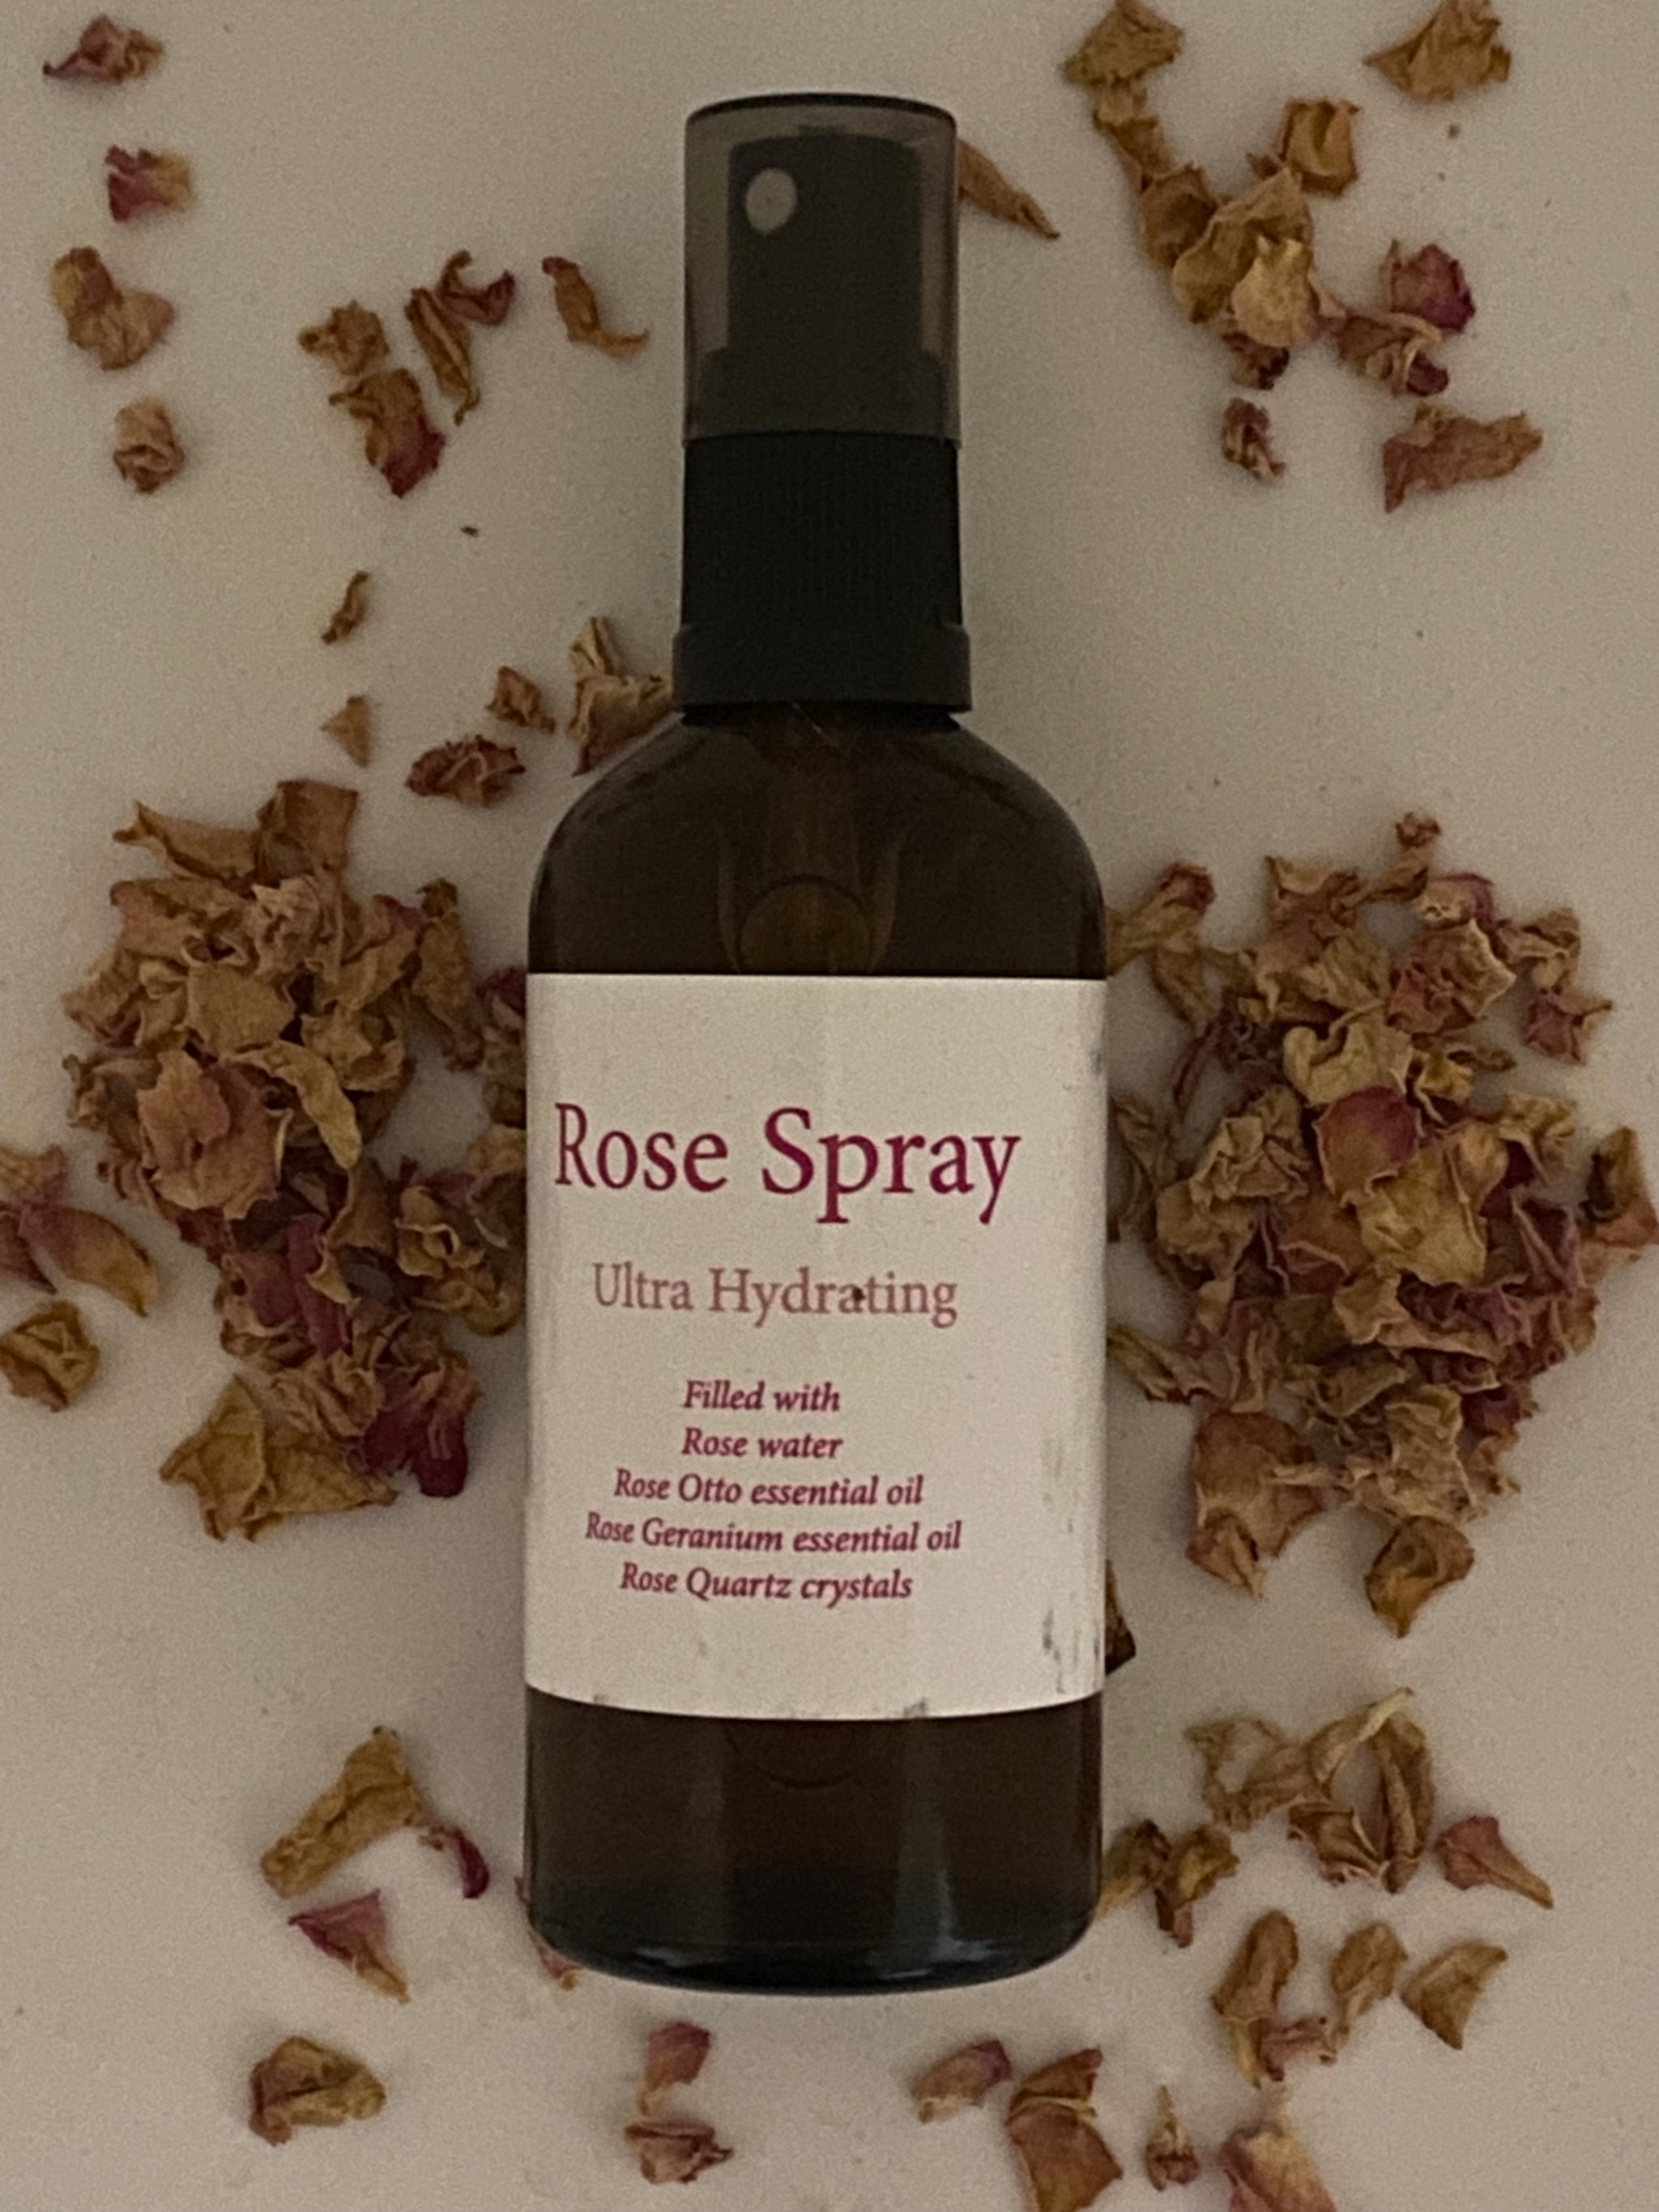 Rose Hydrosol in Floral Water with Charged Crystal chips of Rose Quartz. 100mls.